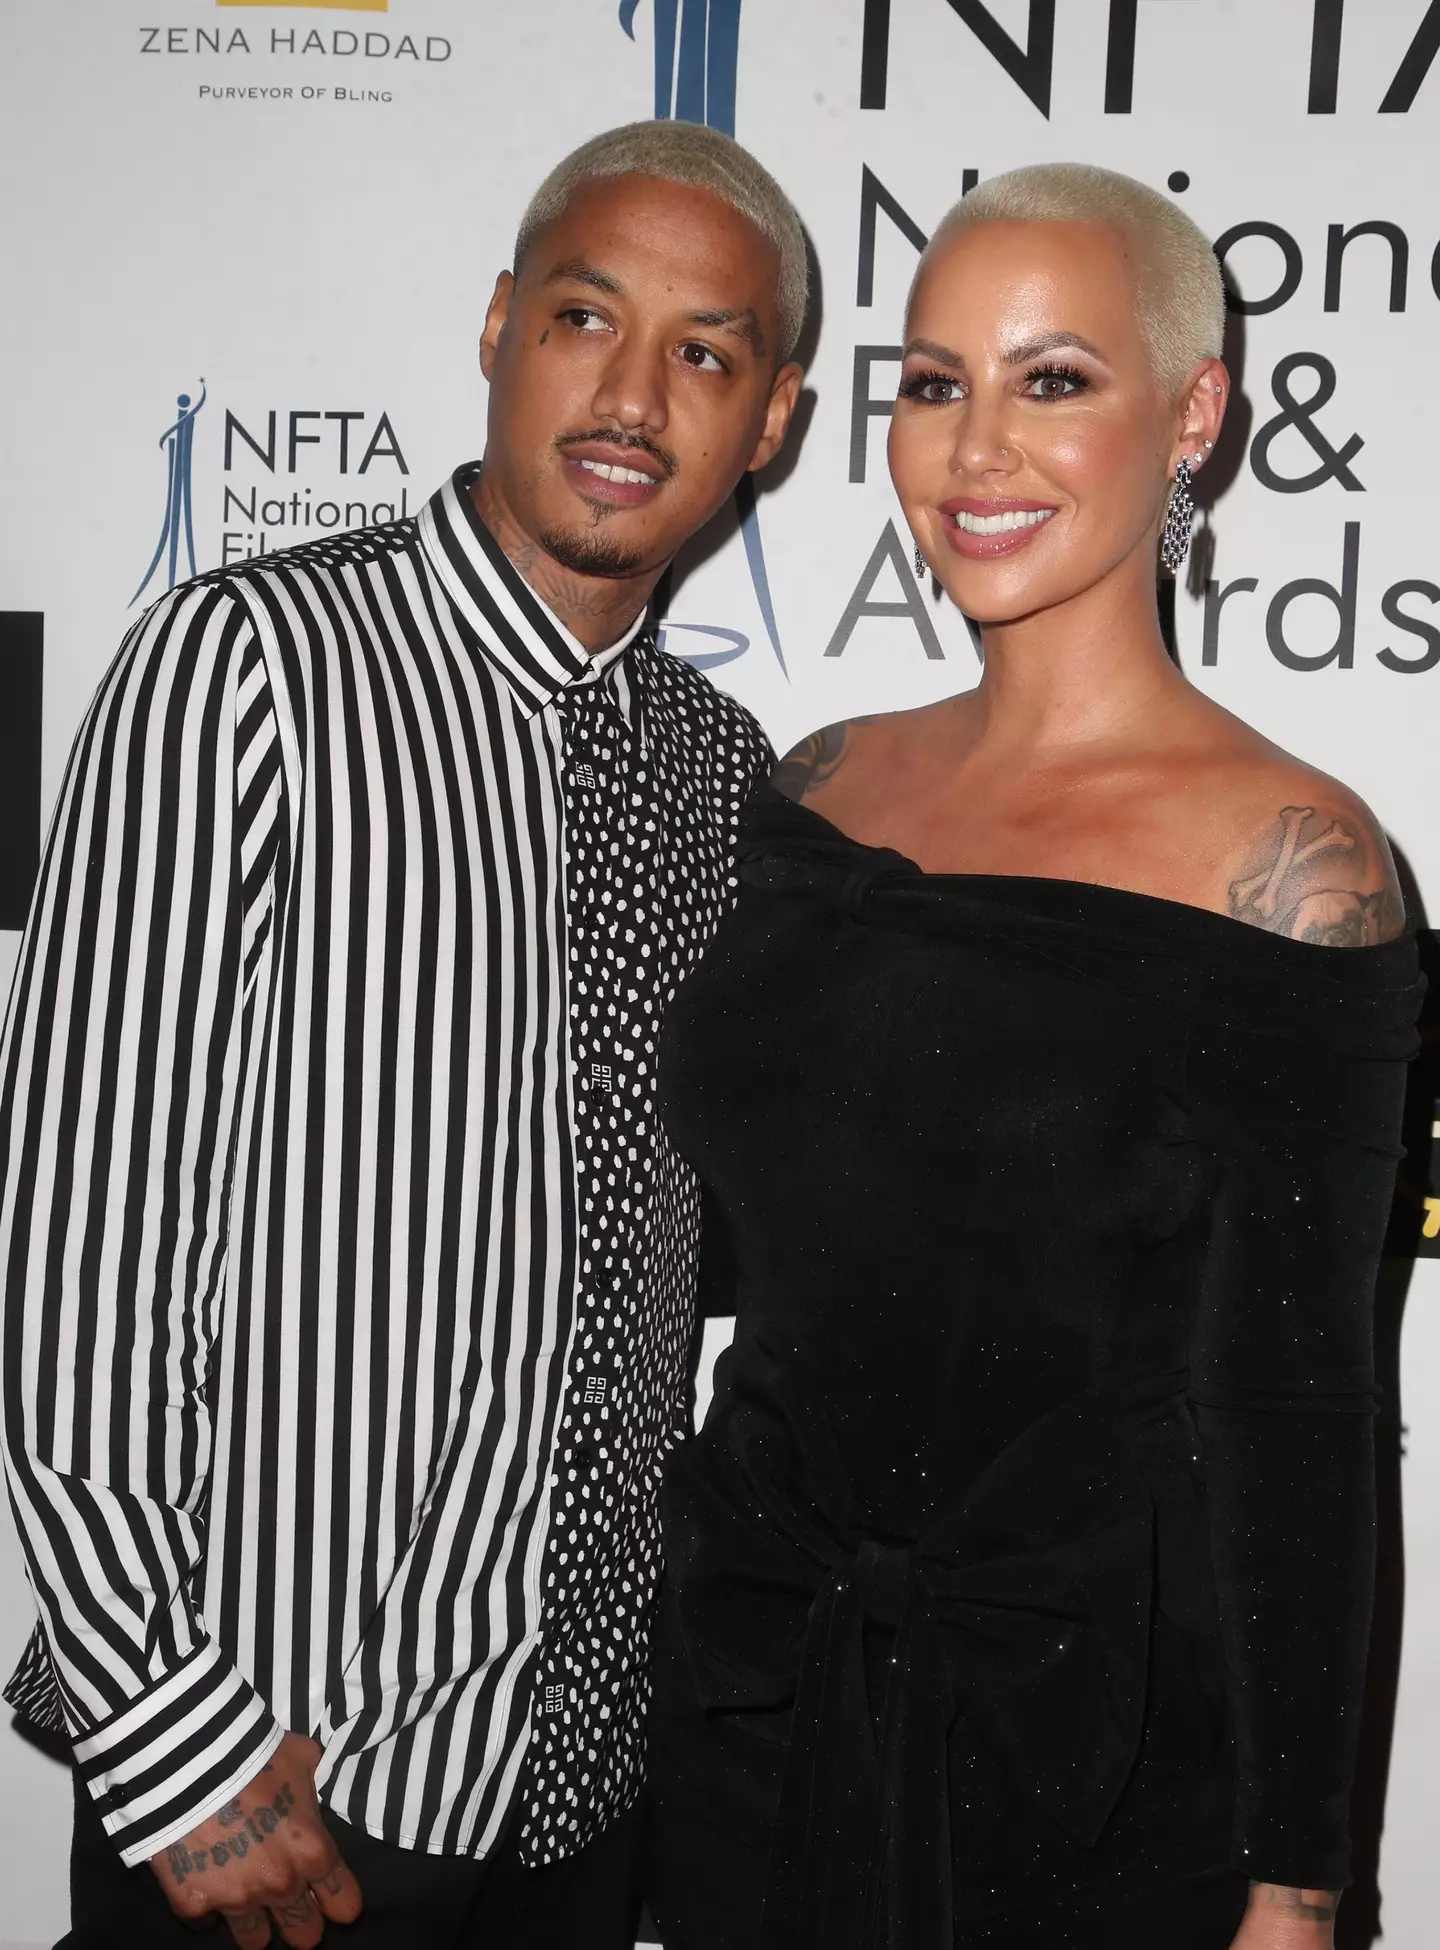 Alexander Edwards with ex Amber Rose in 2018.